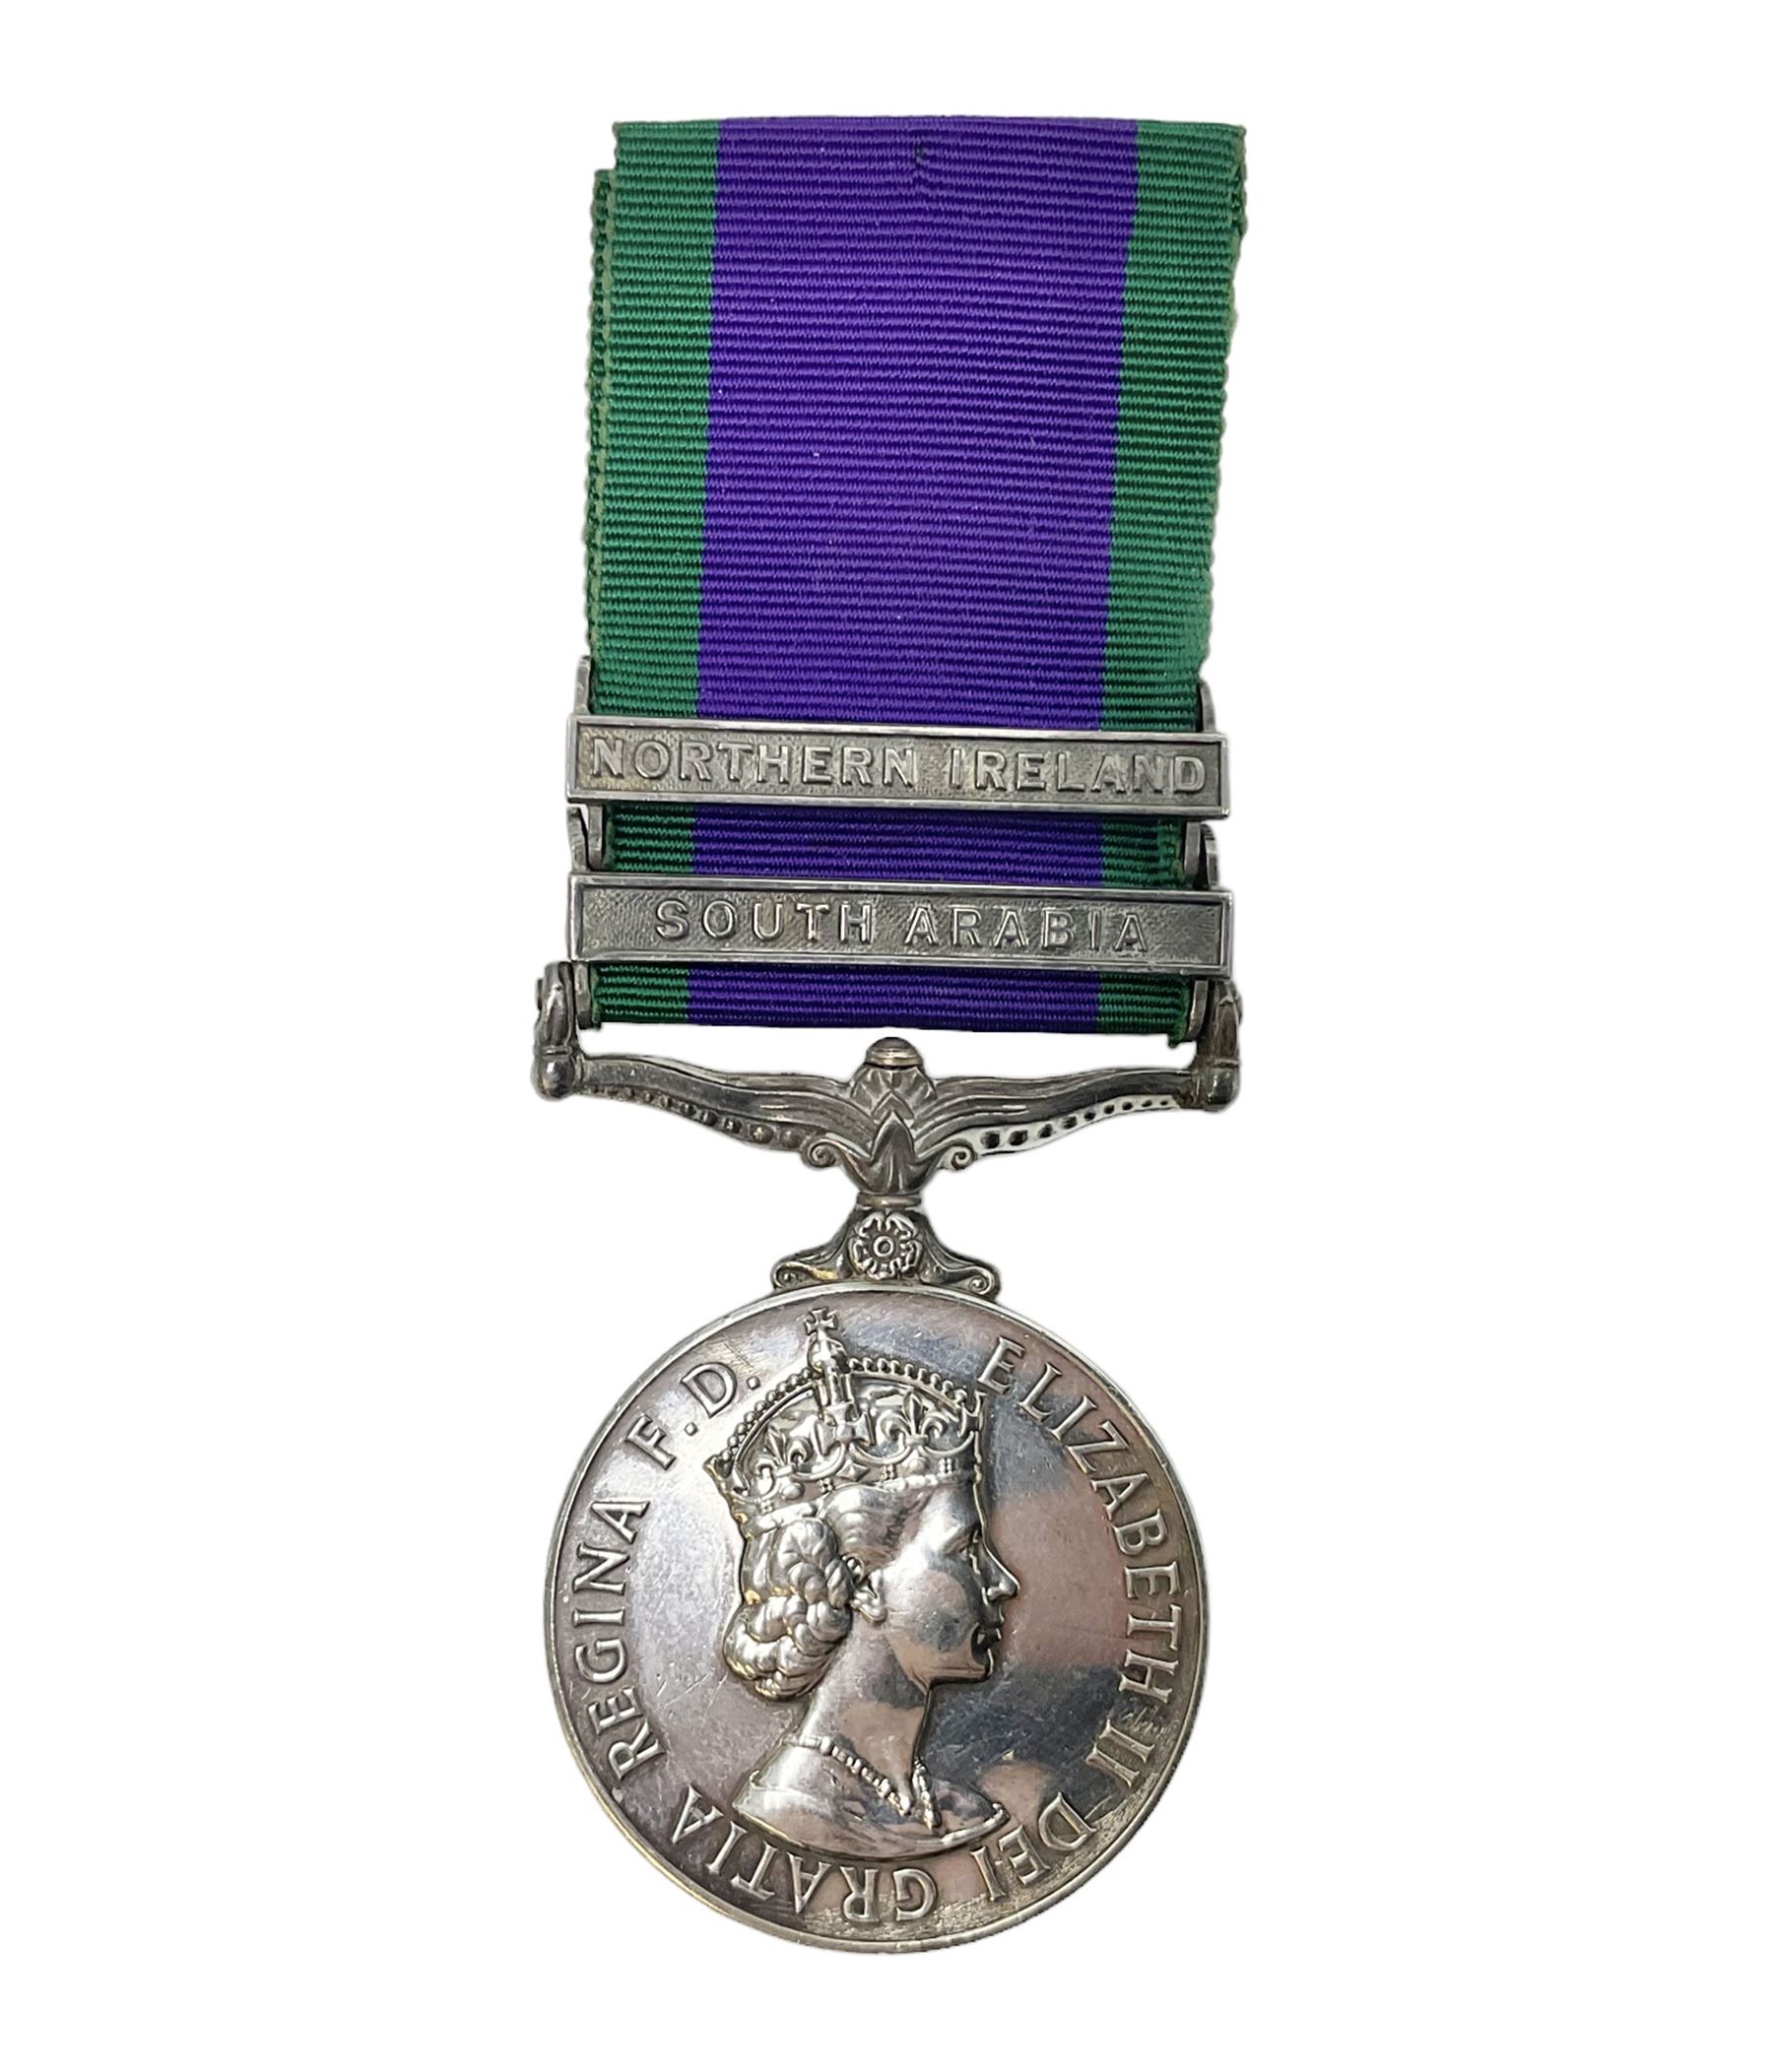 Elizabeth II General Service Medal with two clasps for Northern Ireland and South Arabia awarded to